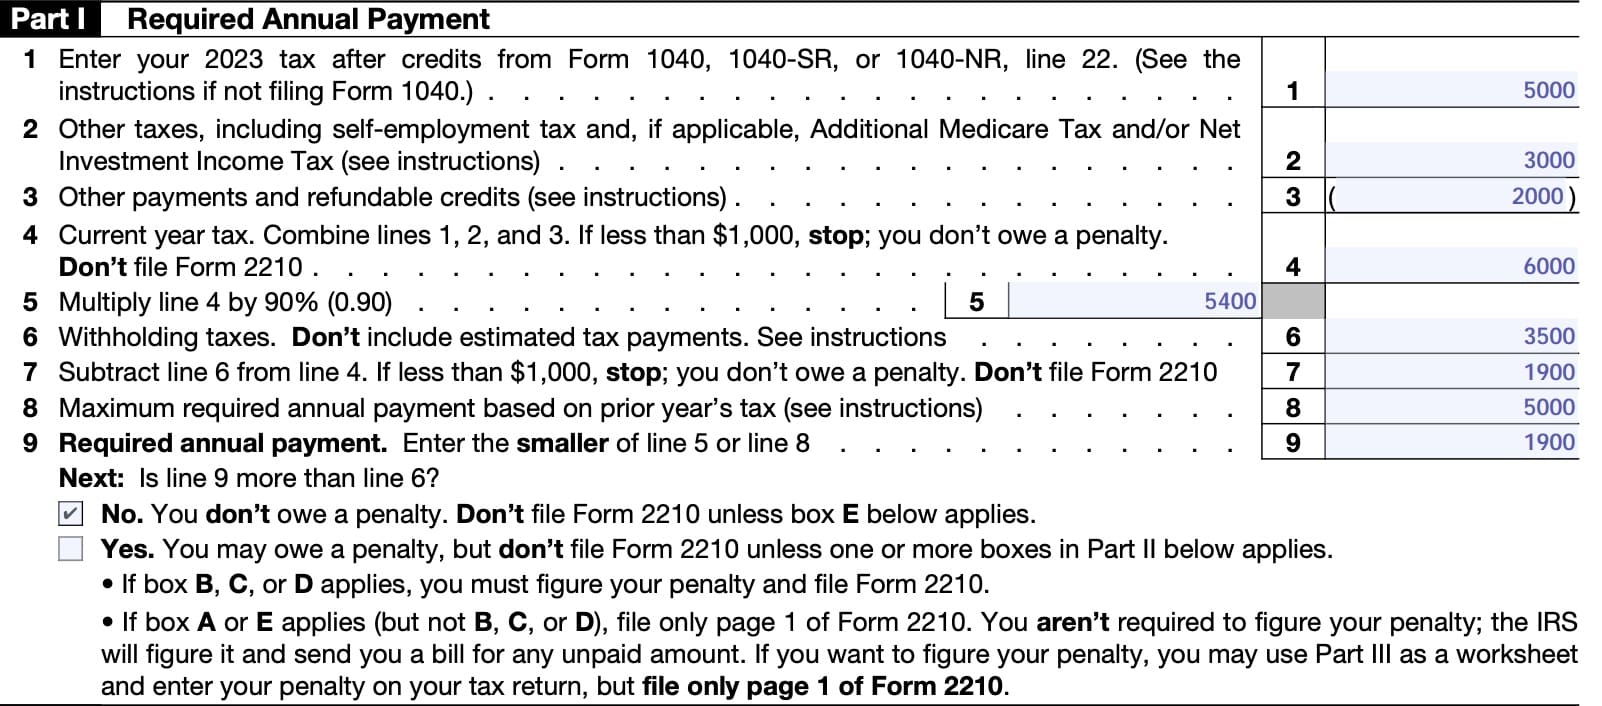 IRS Form 2210 Part I-Required Annual Payment